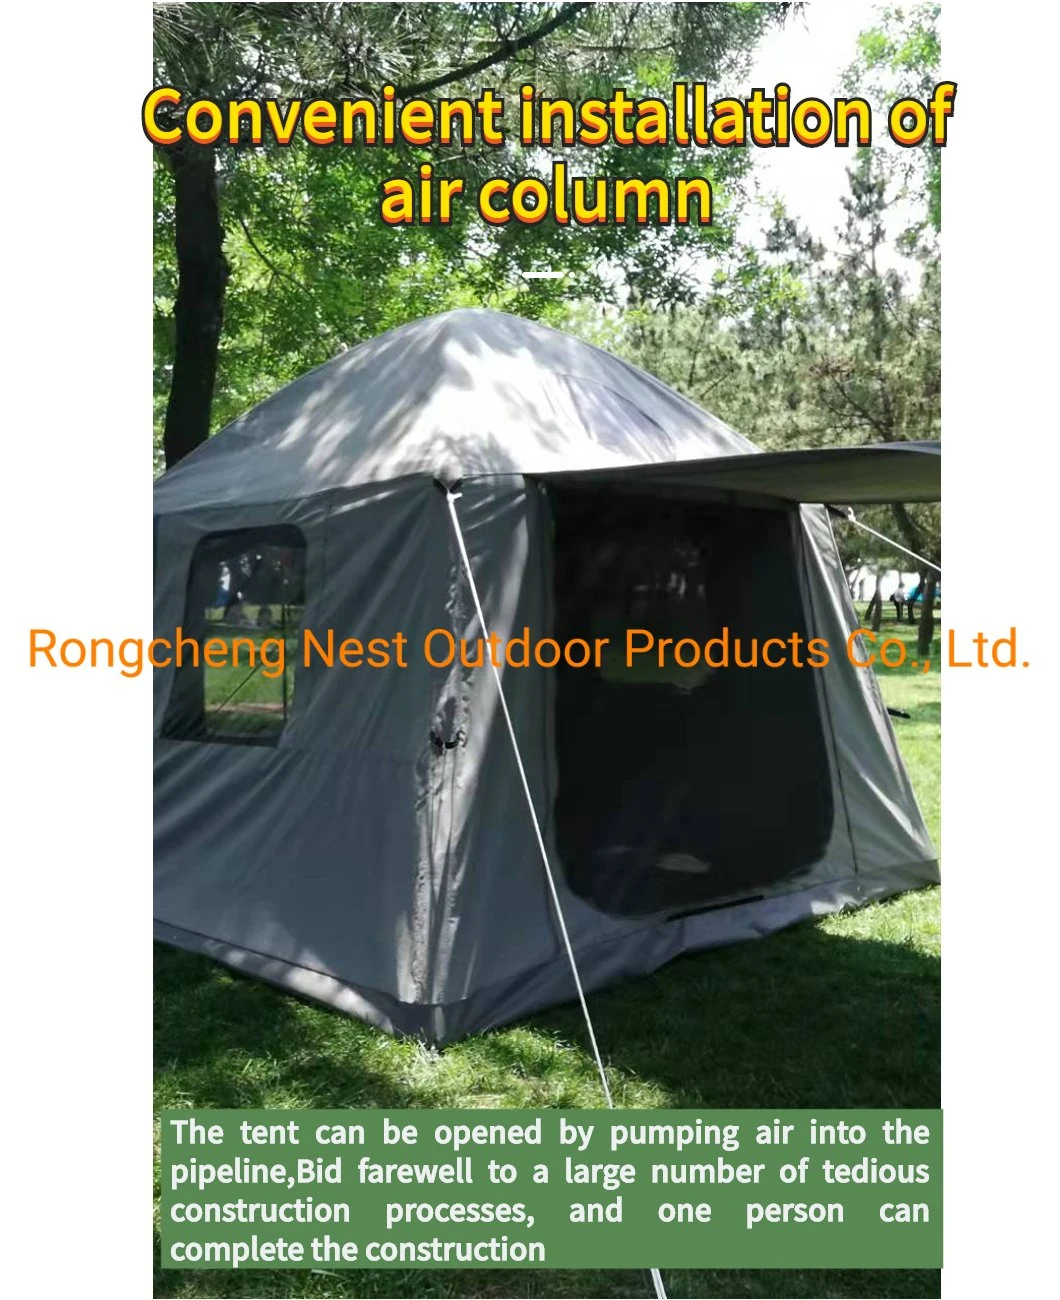 China Manufacturer Outdoor Emergency Instant up and Pack New Waterproof Camping Portable Air Inflatable Camping Tent Price for 3-5 Person